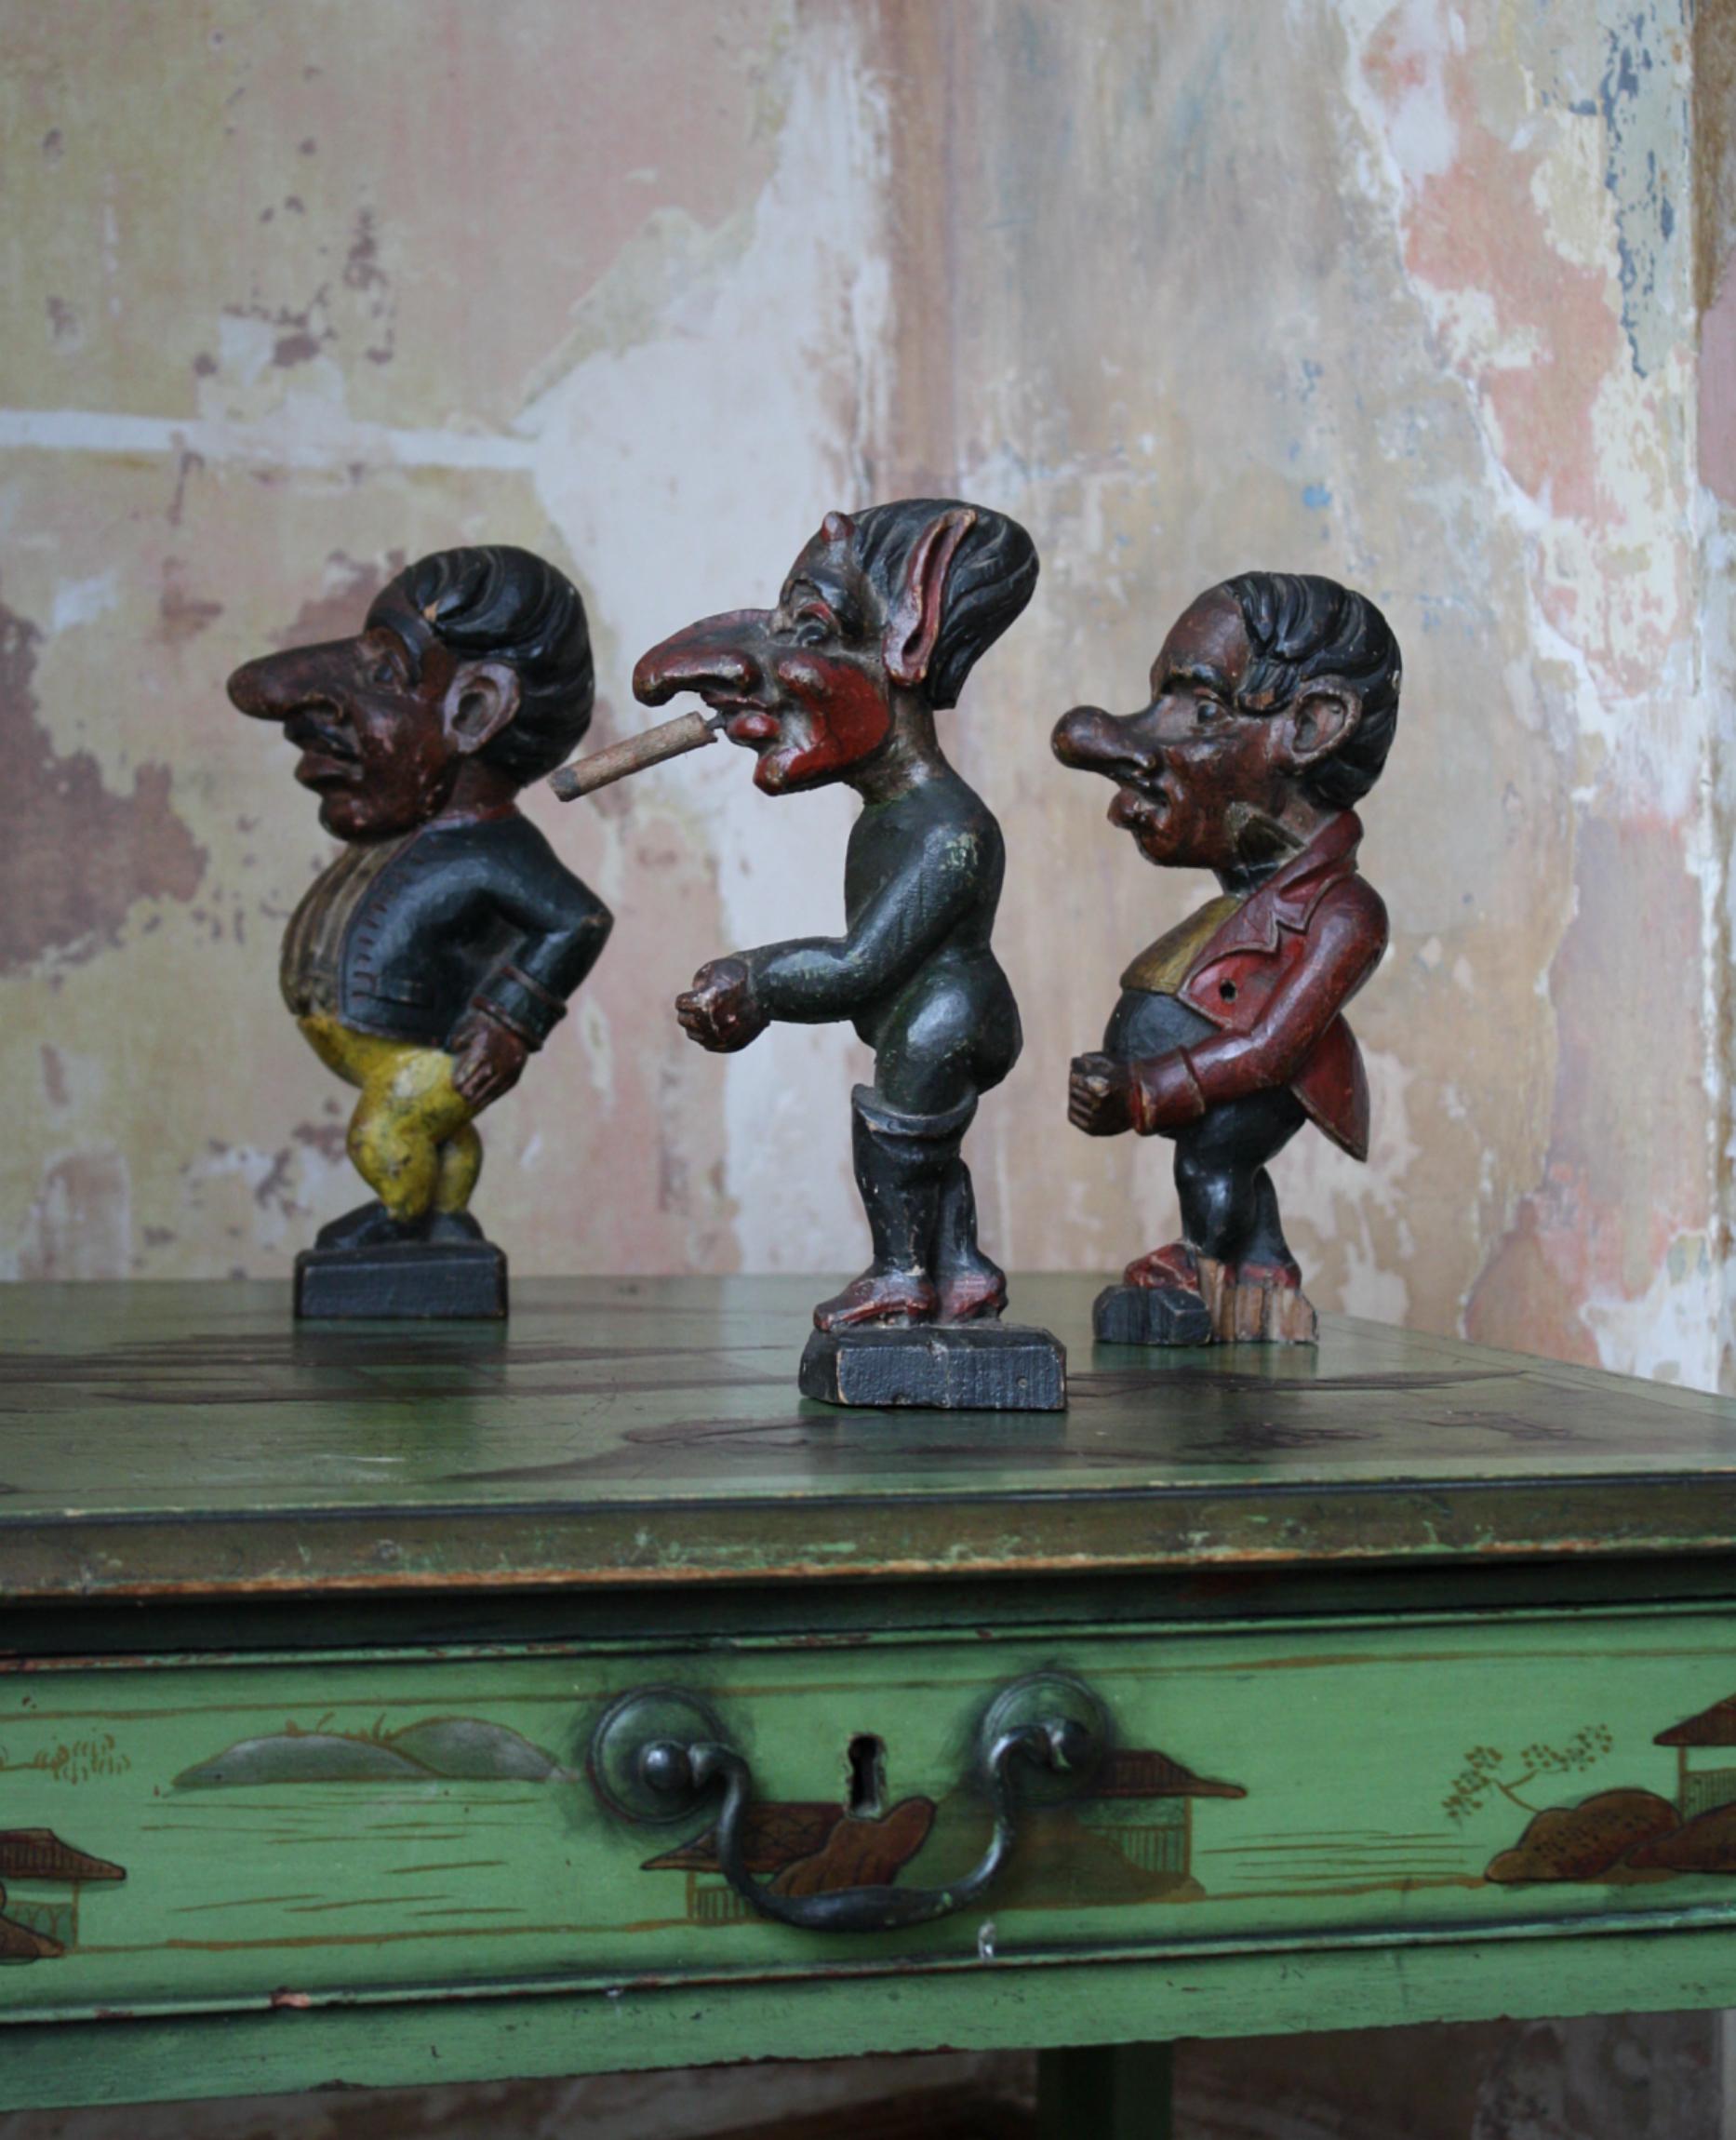 A whimsical trio of hand carved Jeu de Massacre fairground figures, each figure is artfully carved in pitch pine and hand coloured.

Areas of minor wear, some abrasions, knocks, to the original paintwork. A small section of the base is missing